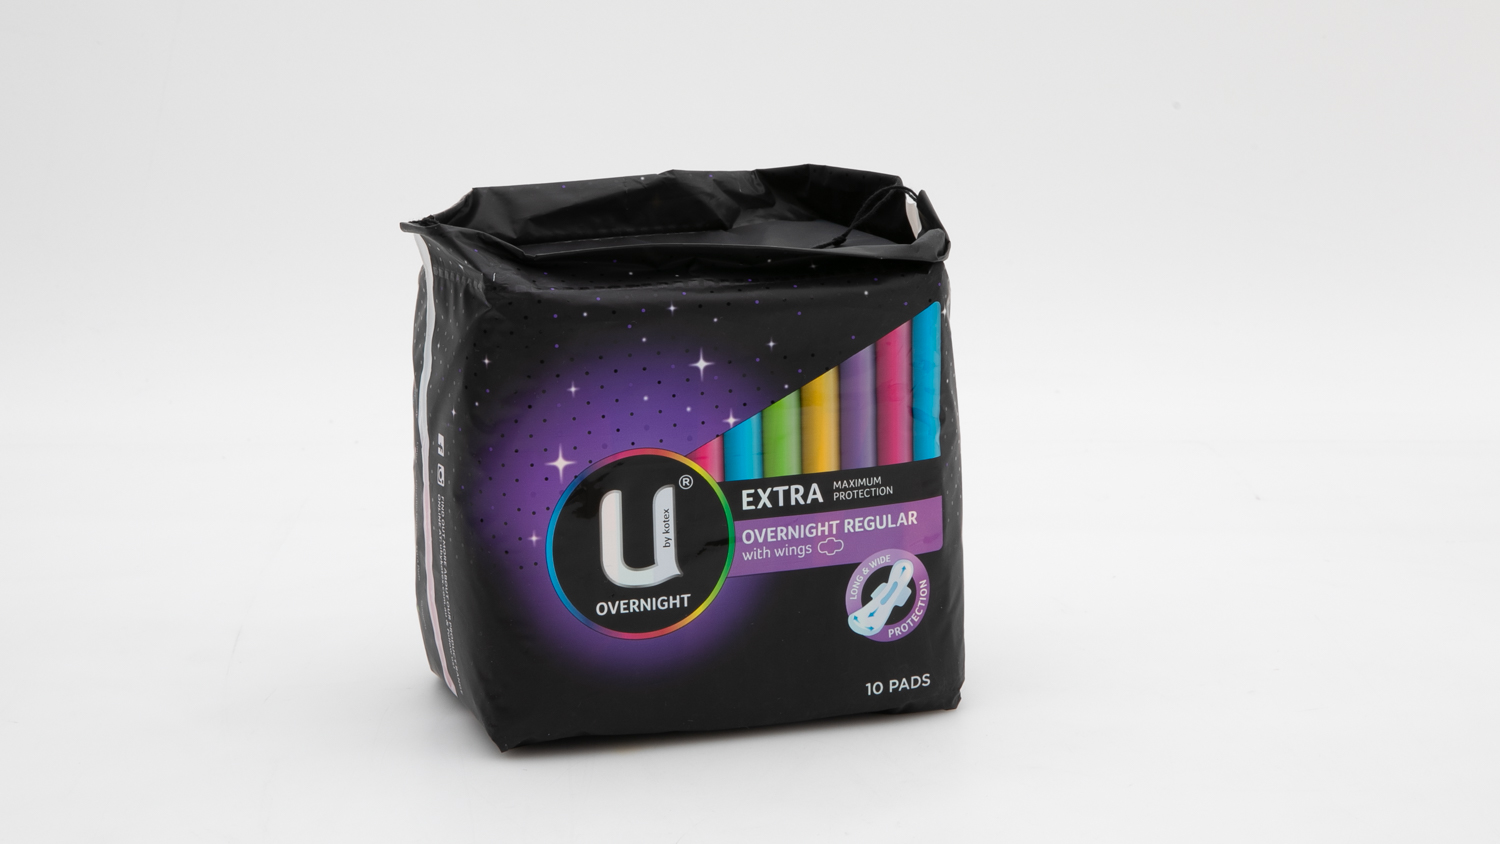 U by Kotex Extra Overnight Regular with wings carousel image